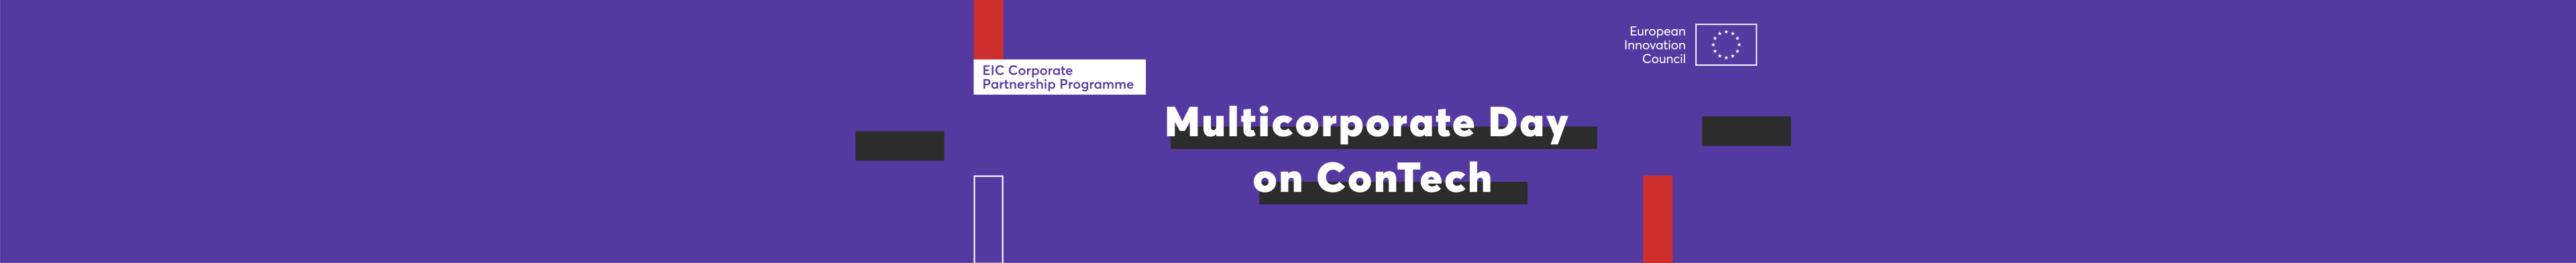 EIC Multicorporate Day on ConTech Community Banner